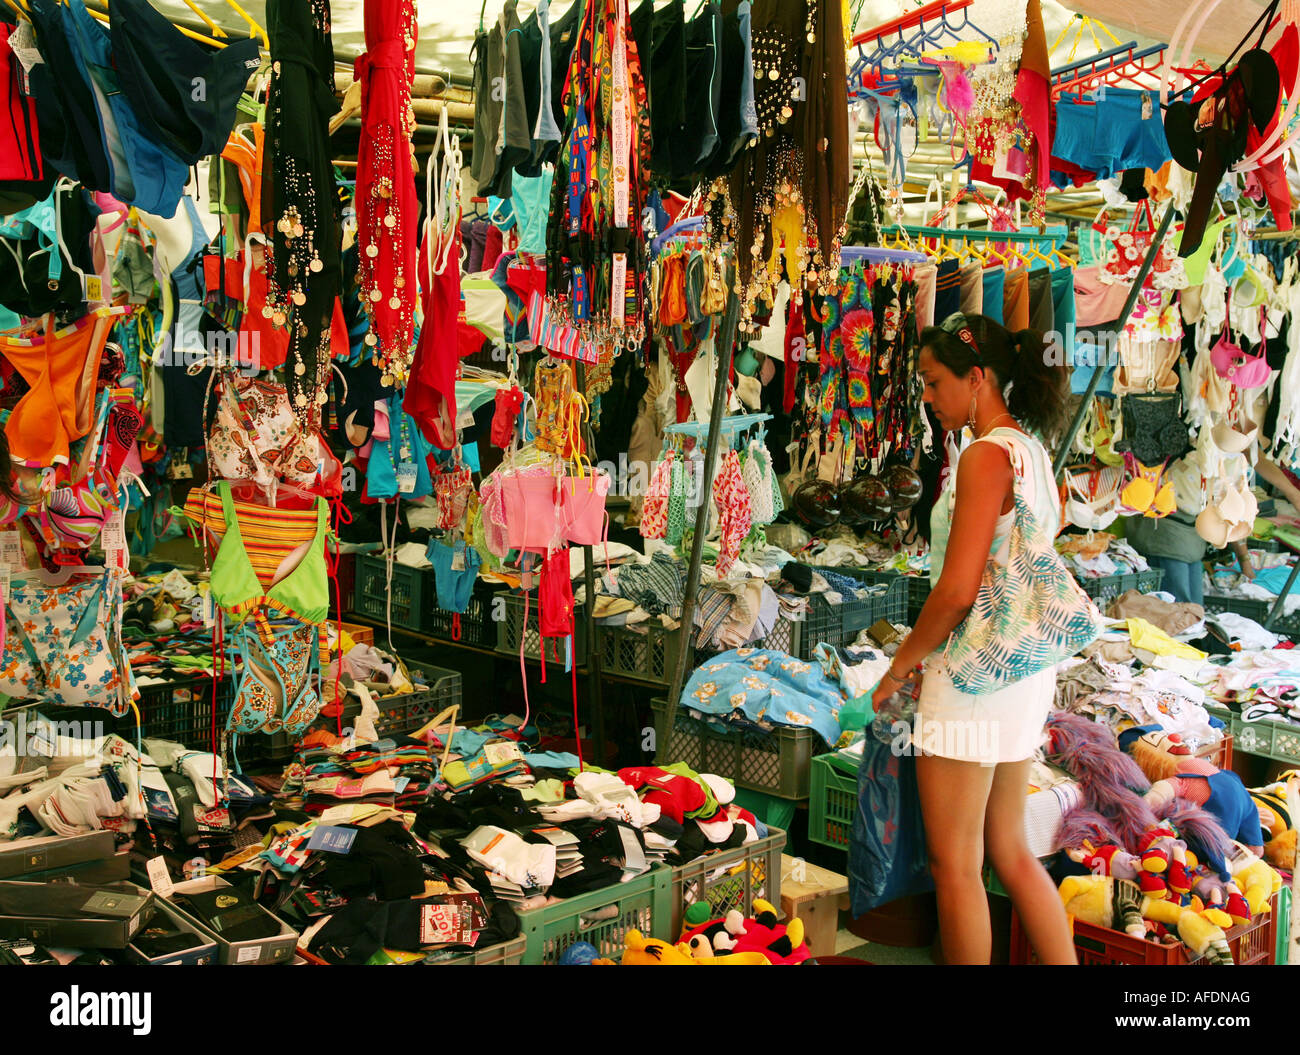 Portugal market - A teenage girl shopping at a clothes stall, the market, 'Viana do Castelo', Portugal, Europe Stock Photo